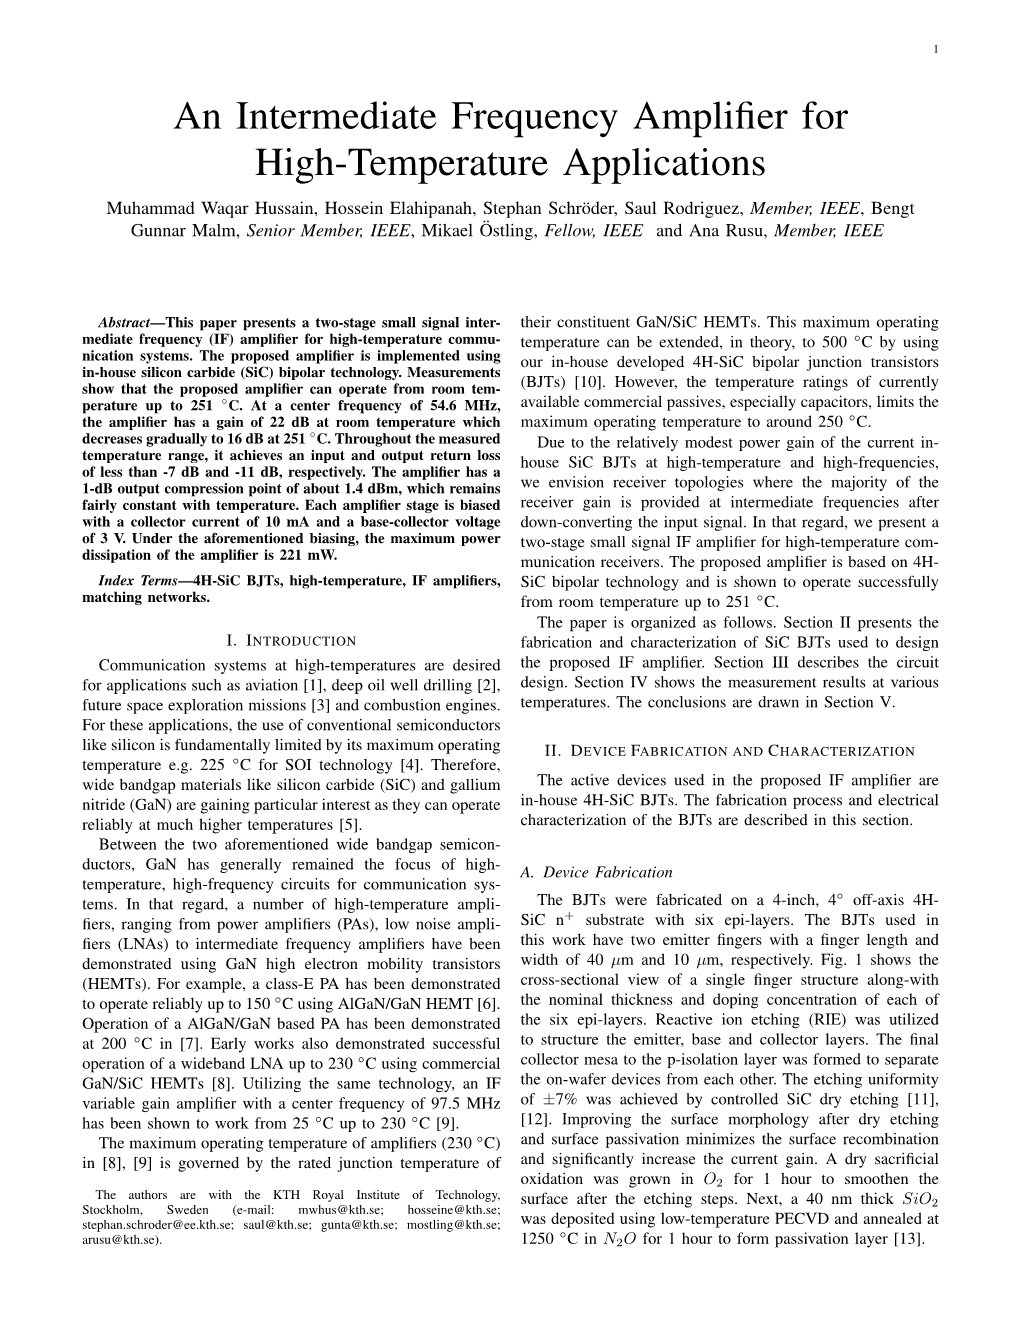 An Intermediate Frequency Amplifier for High-Temperature Applications